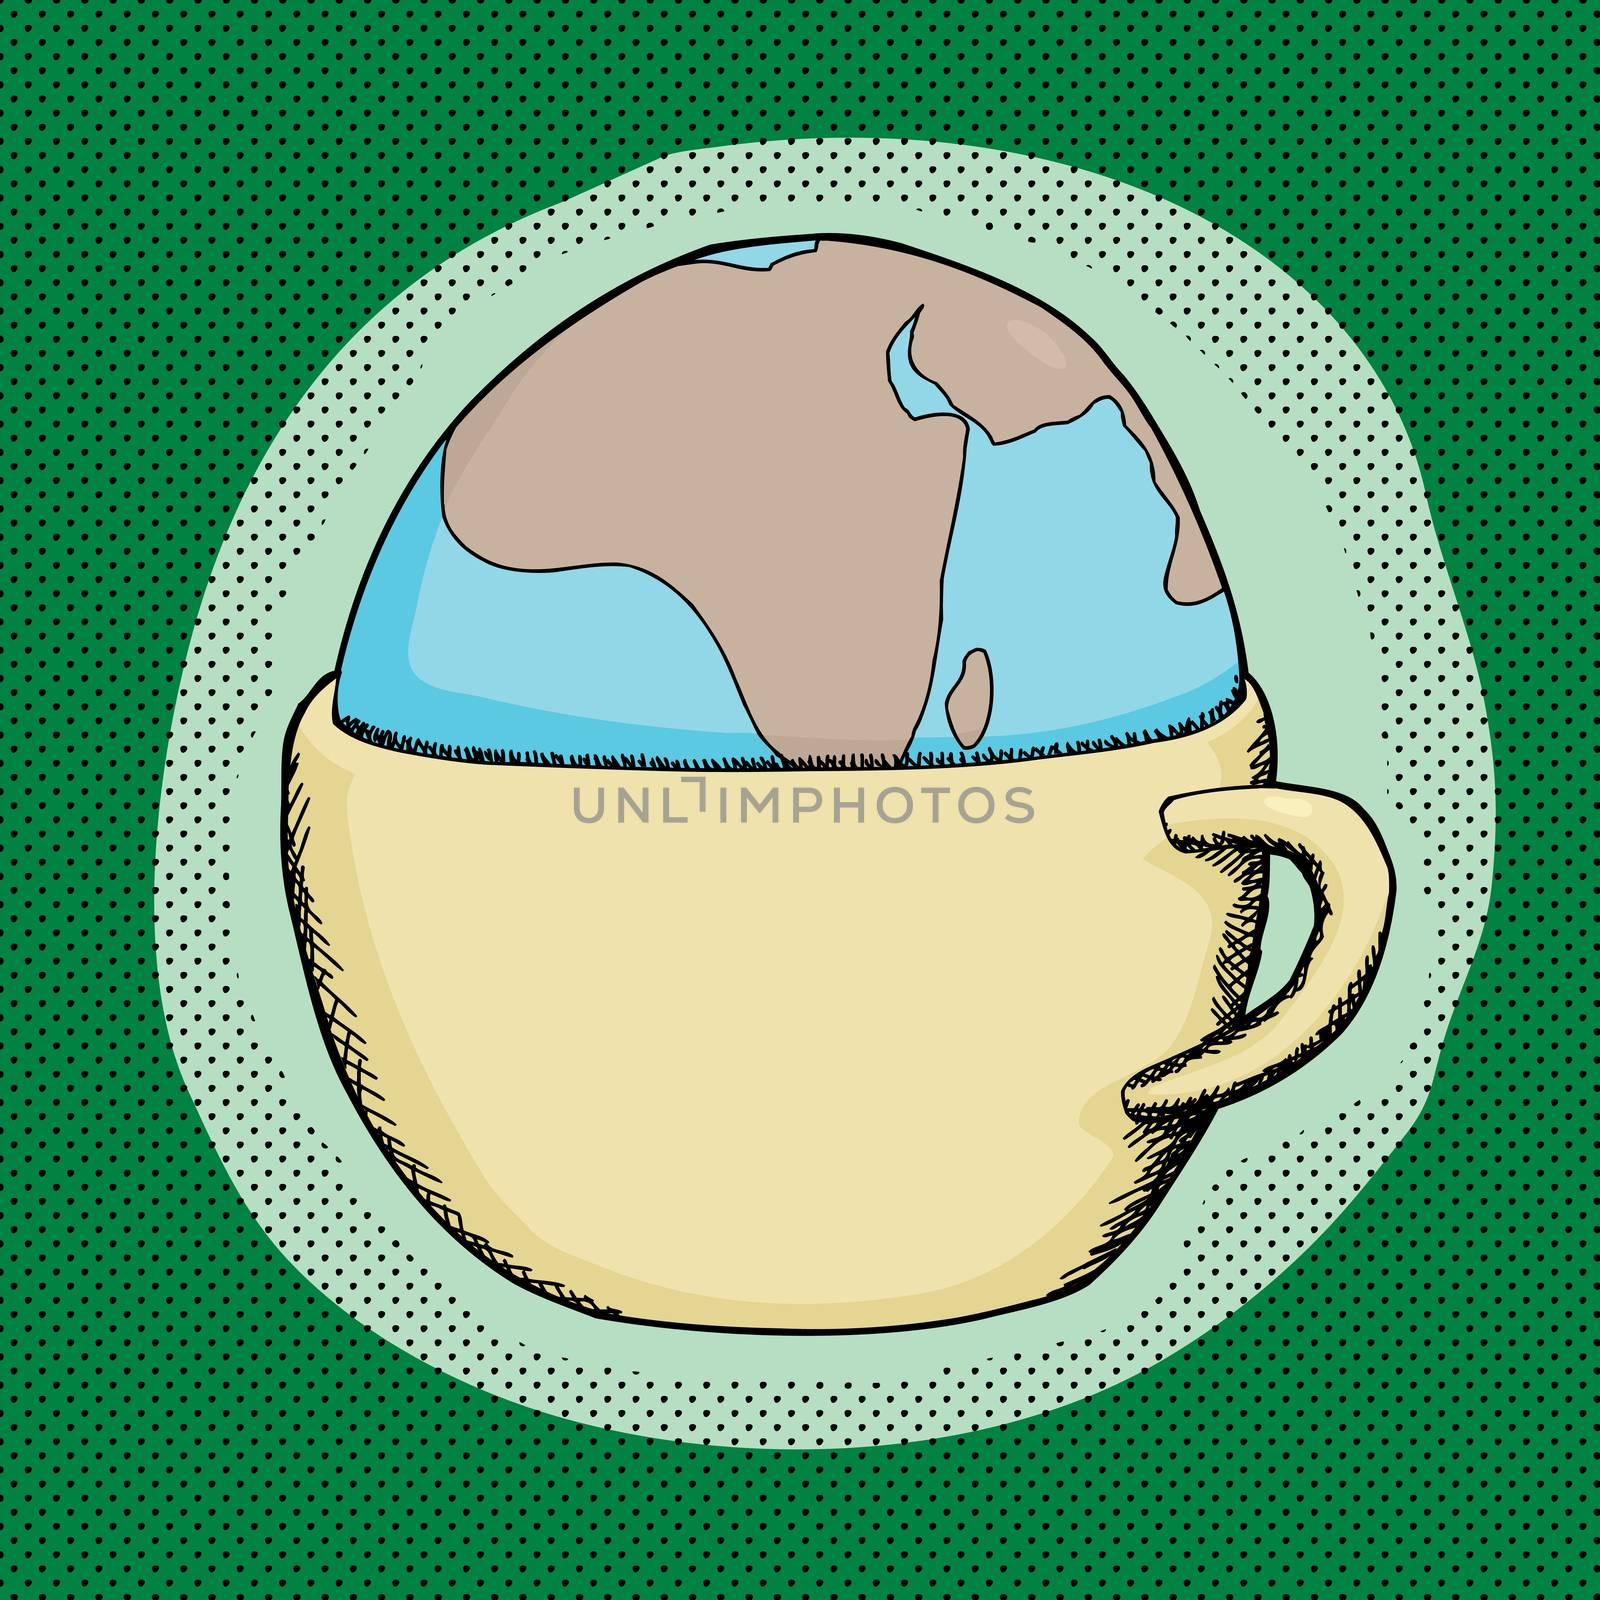 Cartoon of globe inside a cup over green